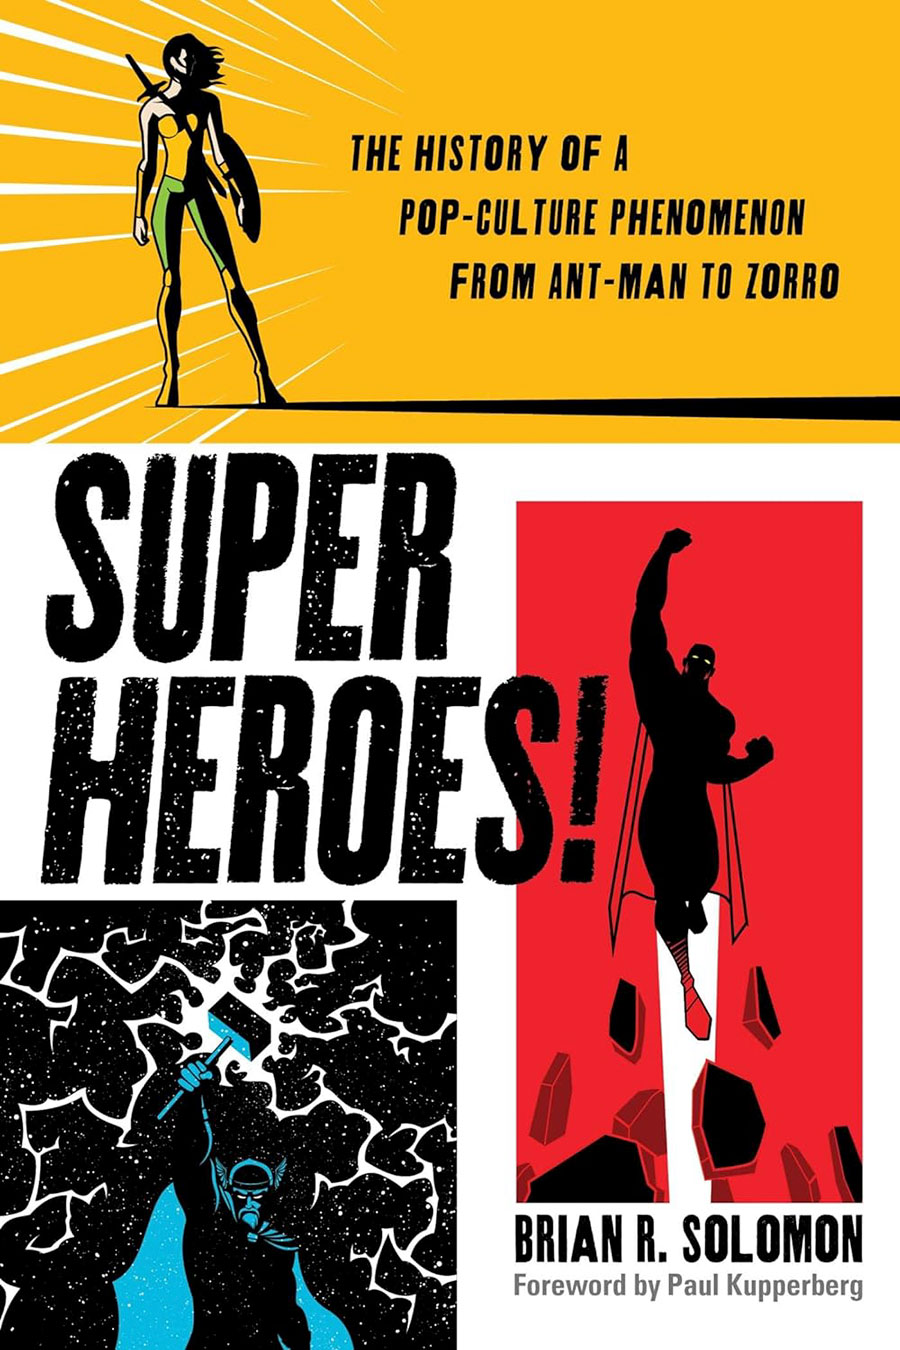 Superheroes History Of A Pop-Culture Phenomenon From Ant-Man To Zorro TP